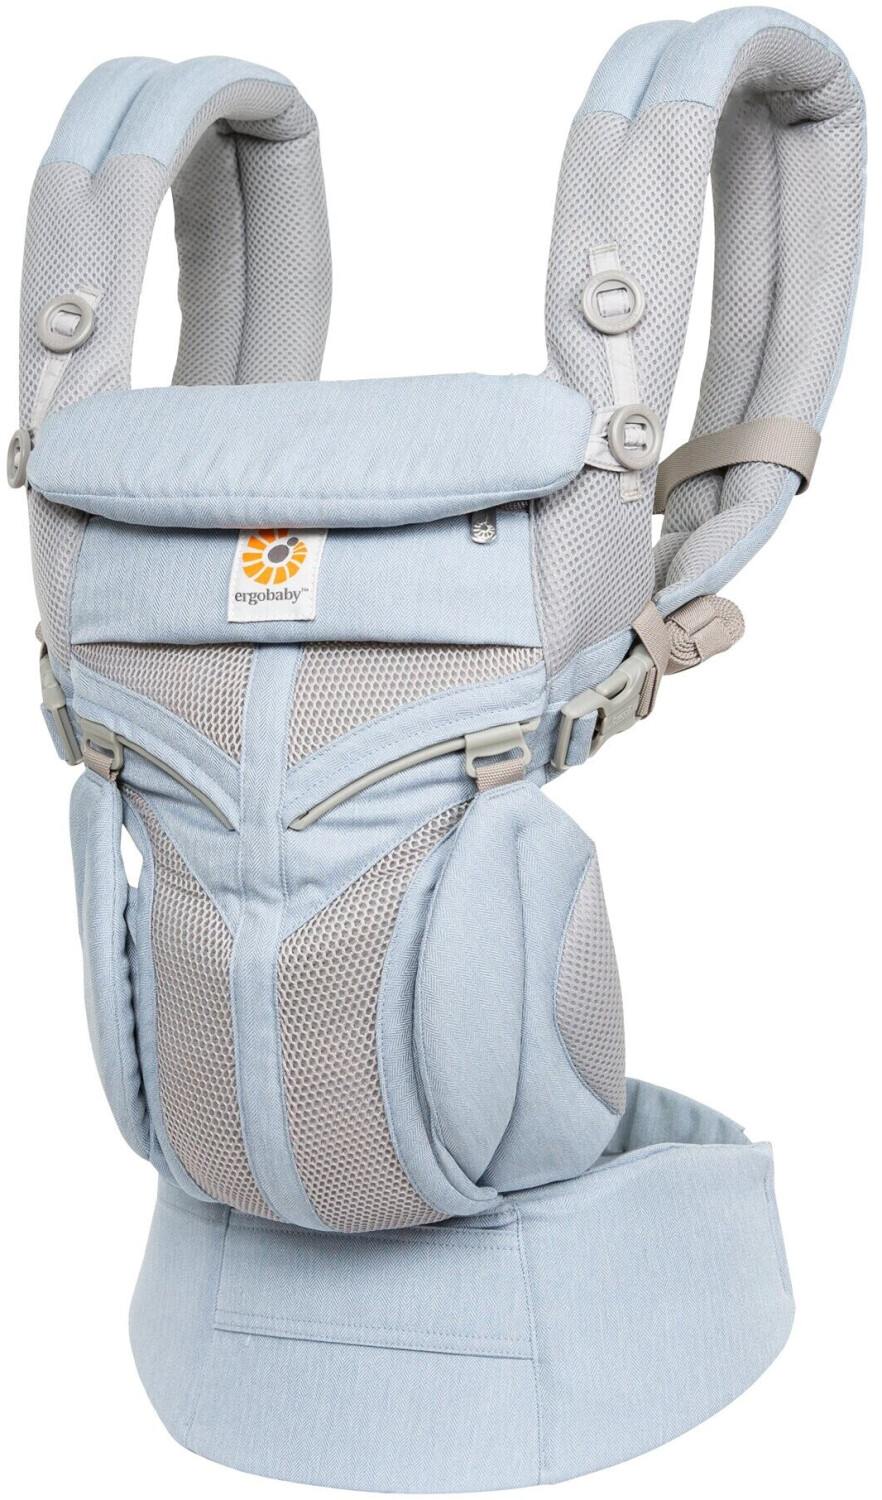 ergobaby Omni 360 Baby Carrier - Cool Air Mesh chambray